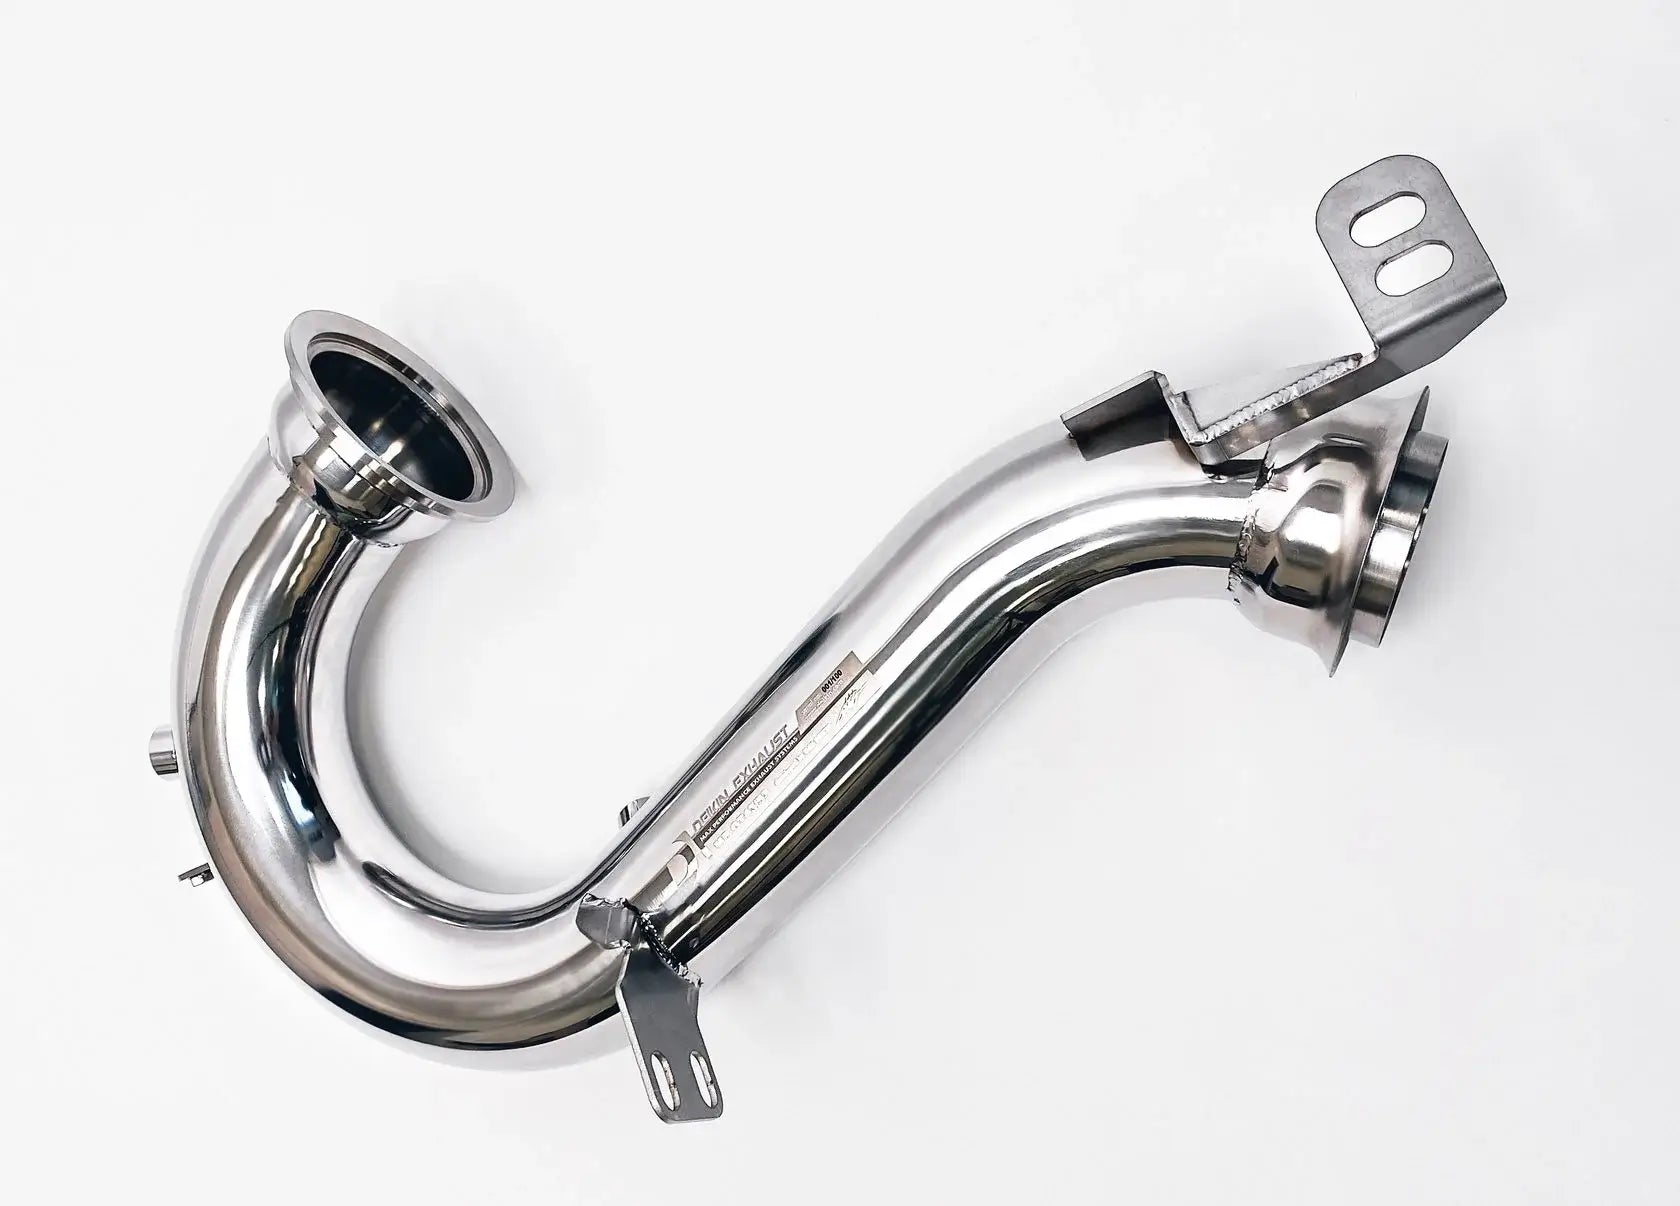 DEIKIN 10-MB.GLE53.V167-DP Downpipe for Mercedes-AMG GLE53 (V167) without HeatShield Photo-1 